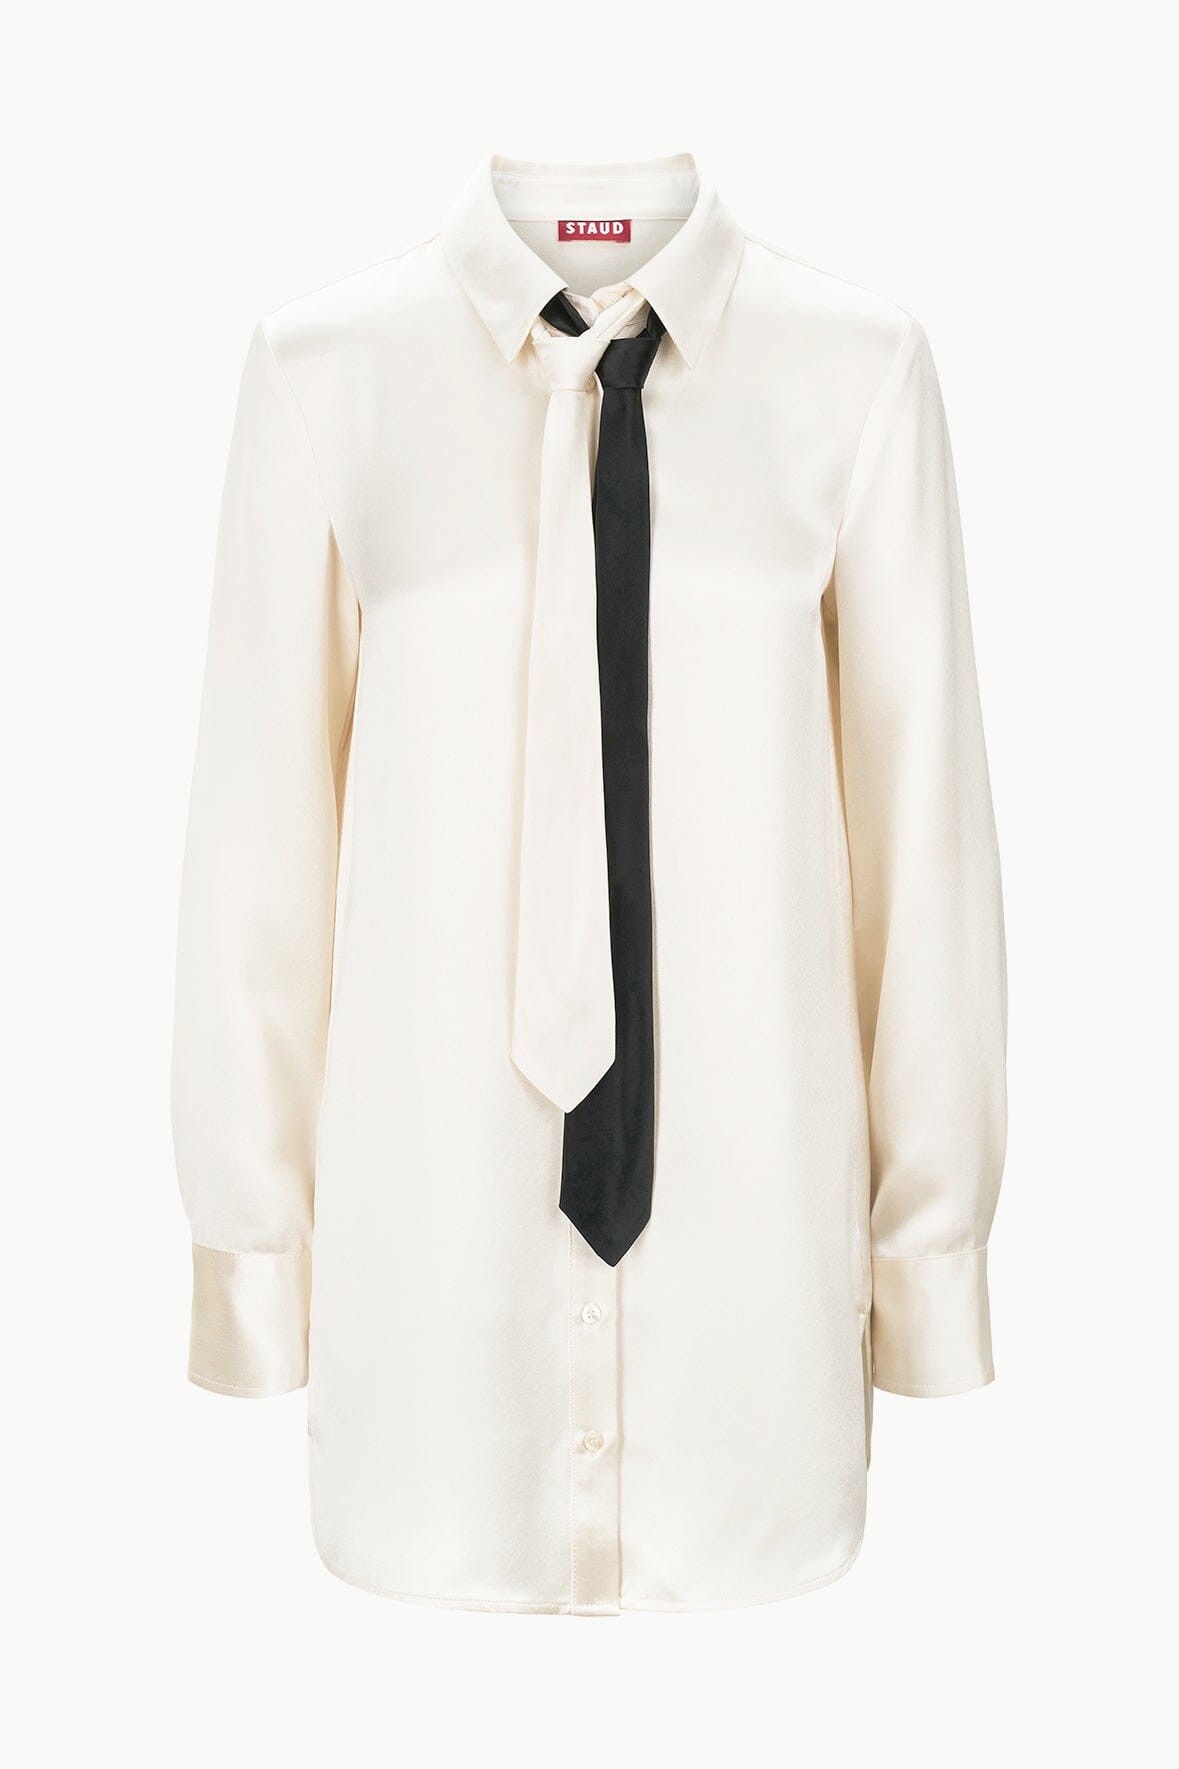 Chanel like White Dress with Black Bow - Shopping and Info